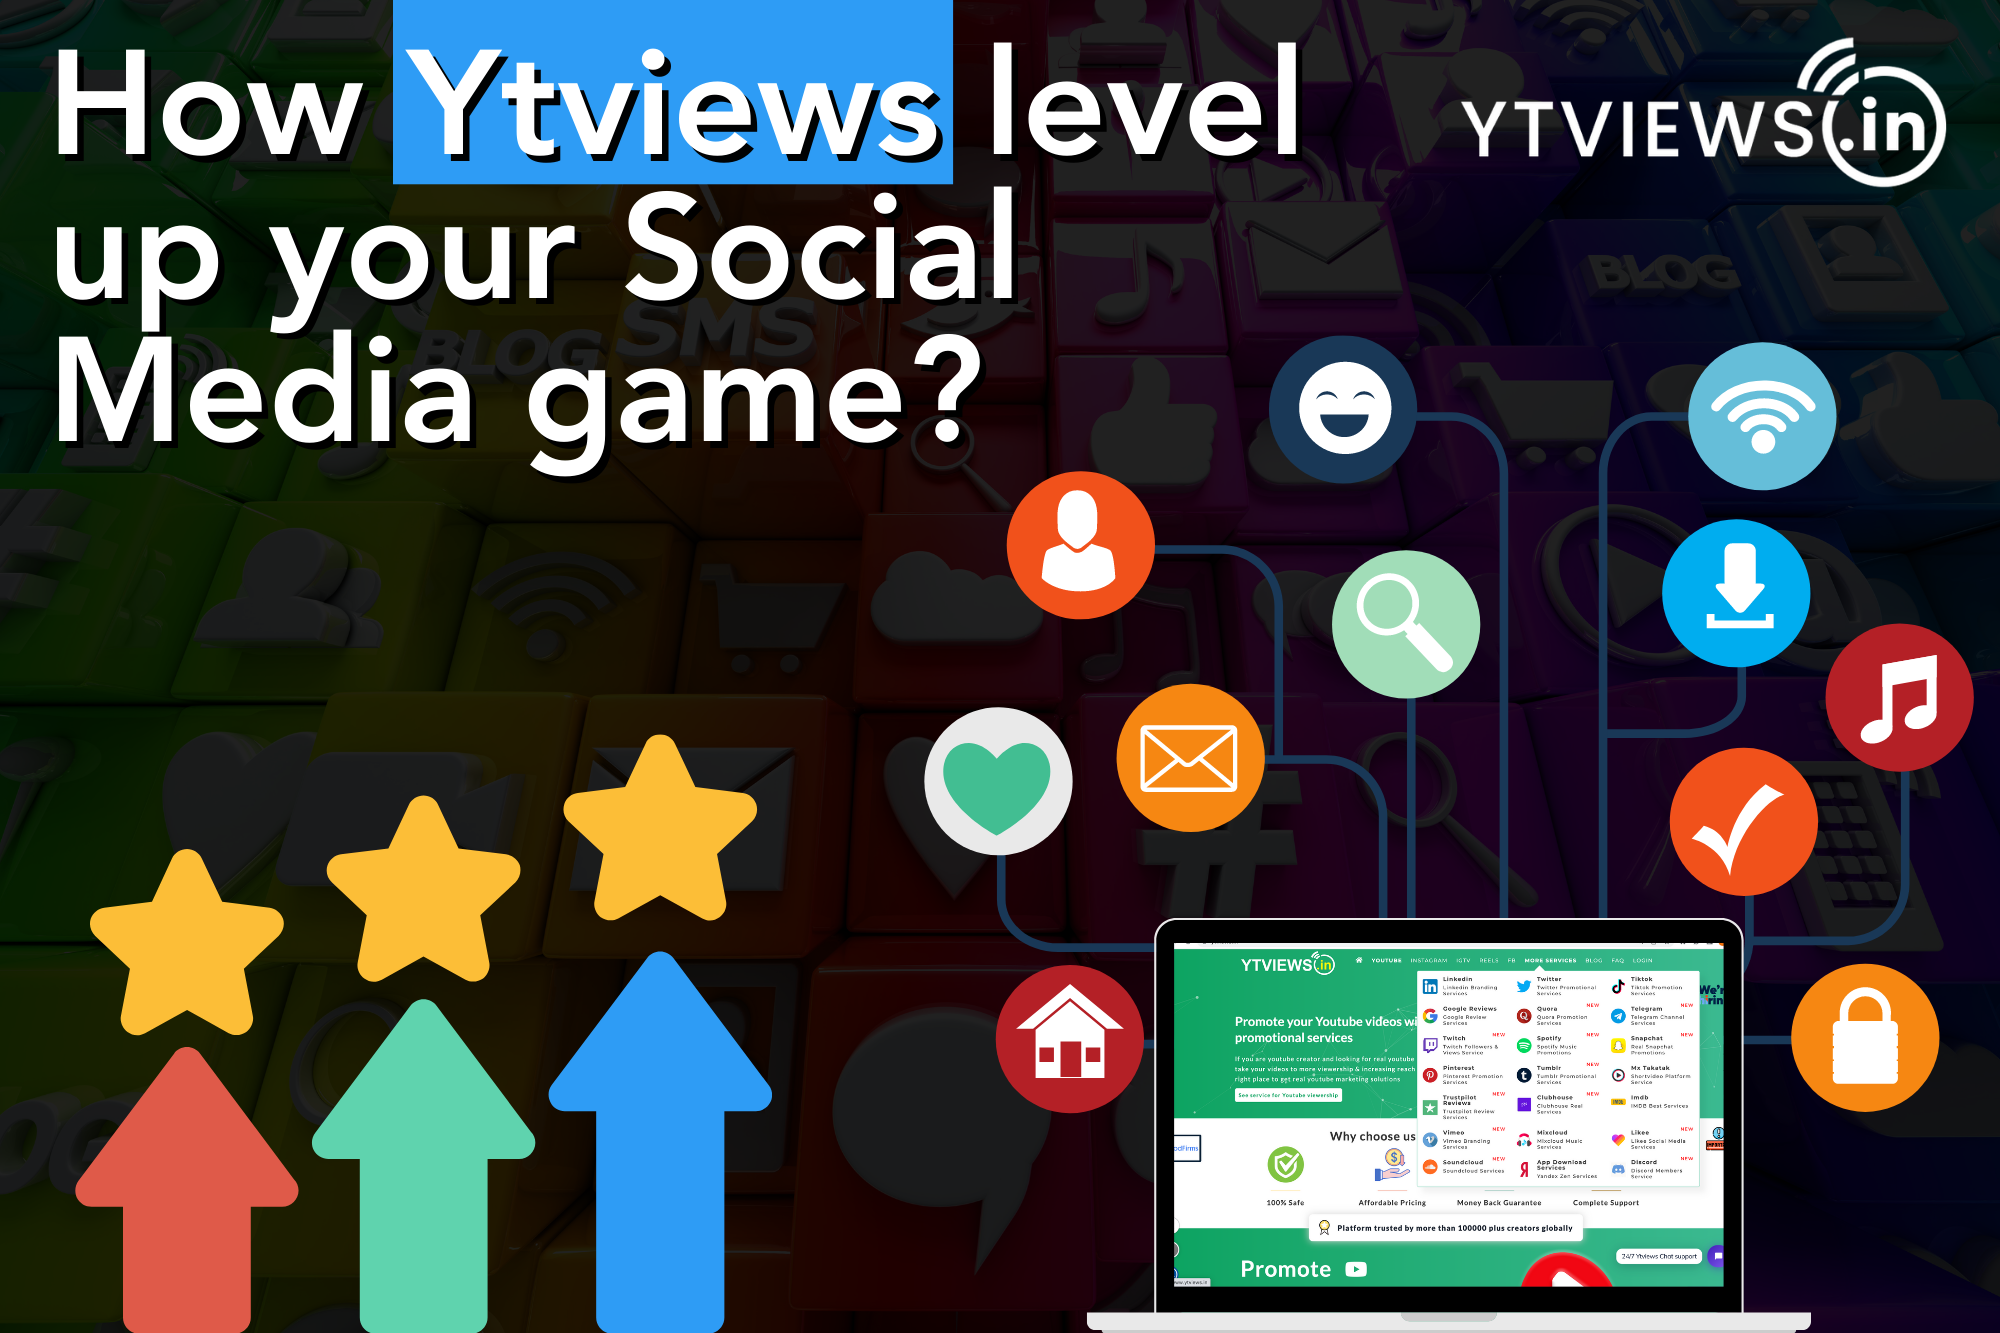 YTViews: Elevating the social media marketing game with unparalleled campaigns